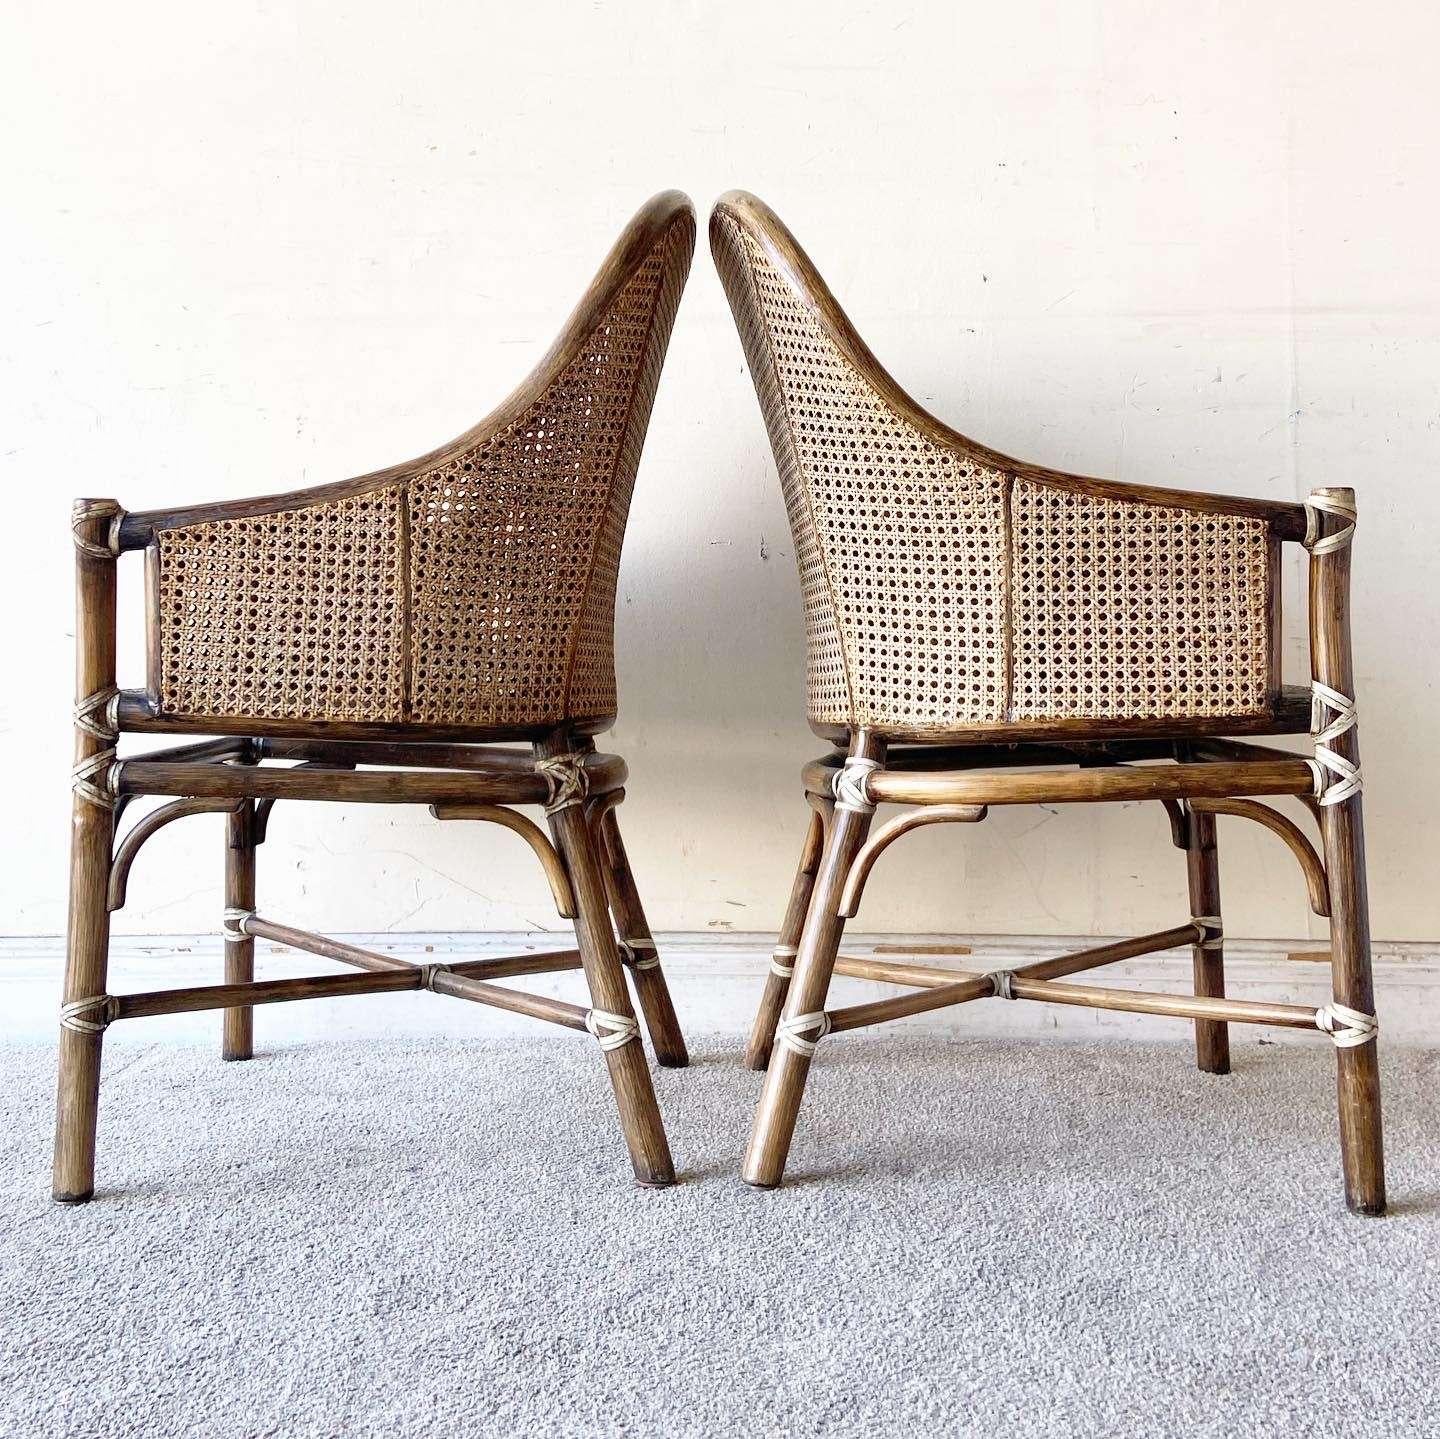 Bohemian Bamboo and Cane Arm Chairs by McGuire - Set of 4 In Good Condition For Sale In Delray Beach, FL